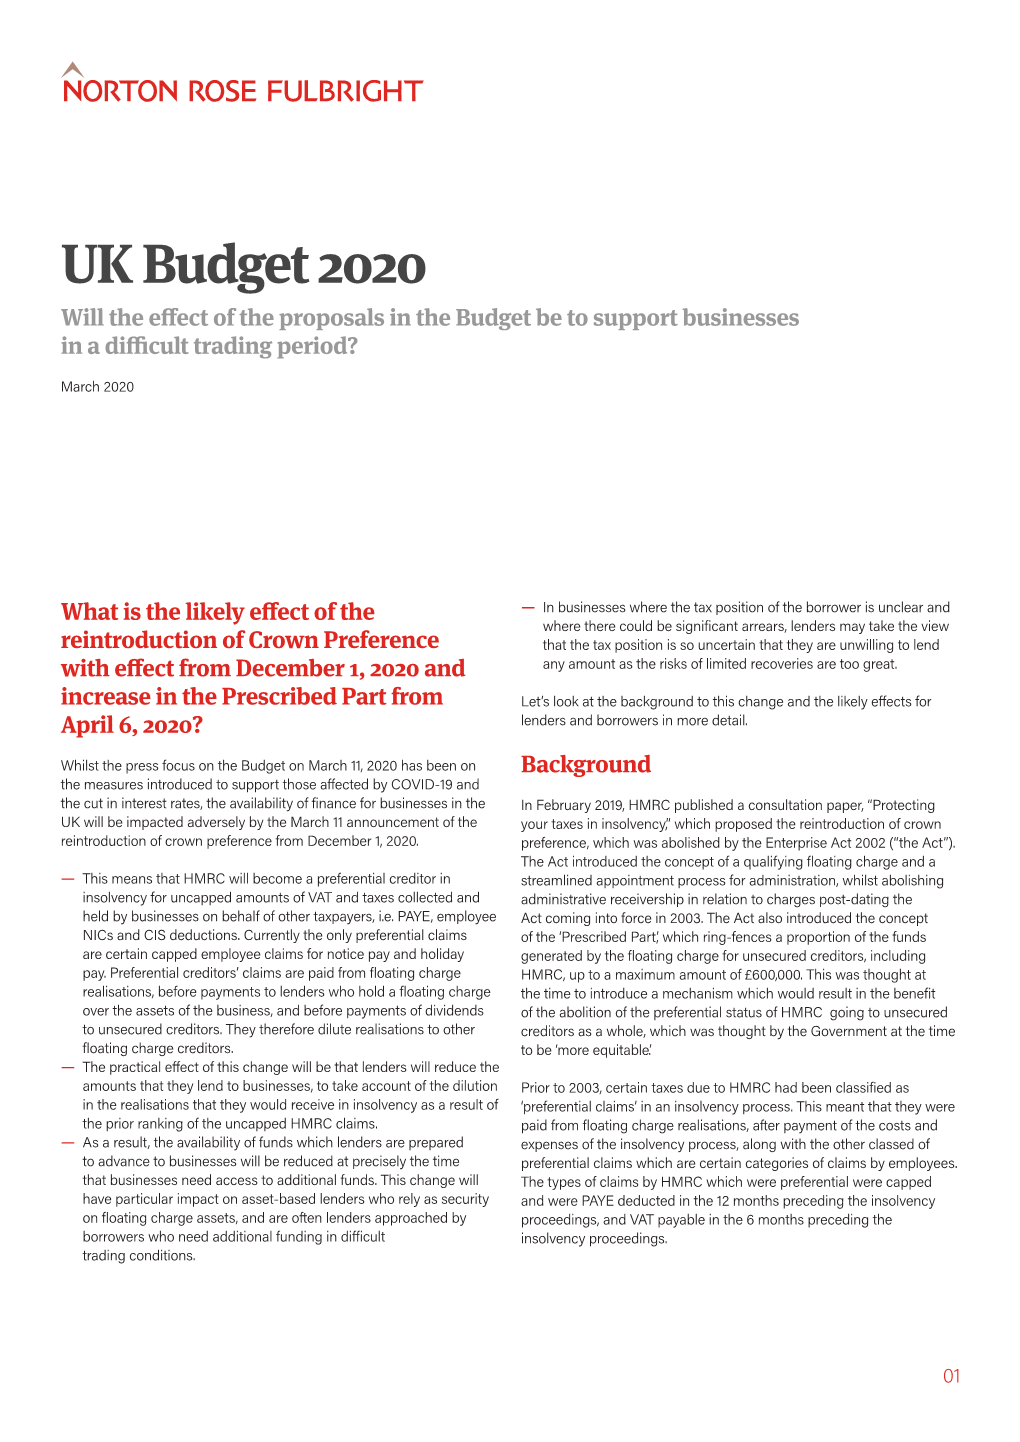 UK Budget 2020 Will the Effect of the Proposals in the Budget Be to Support Businesses in a Difficult Trading Period?